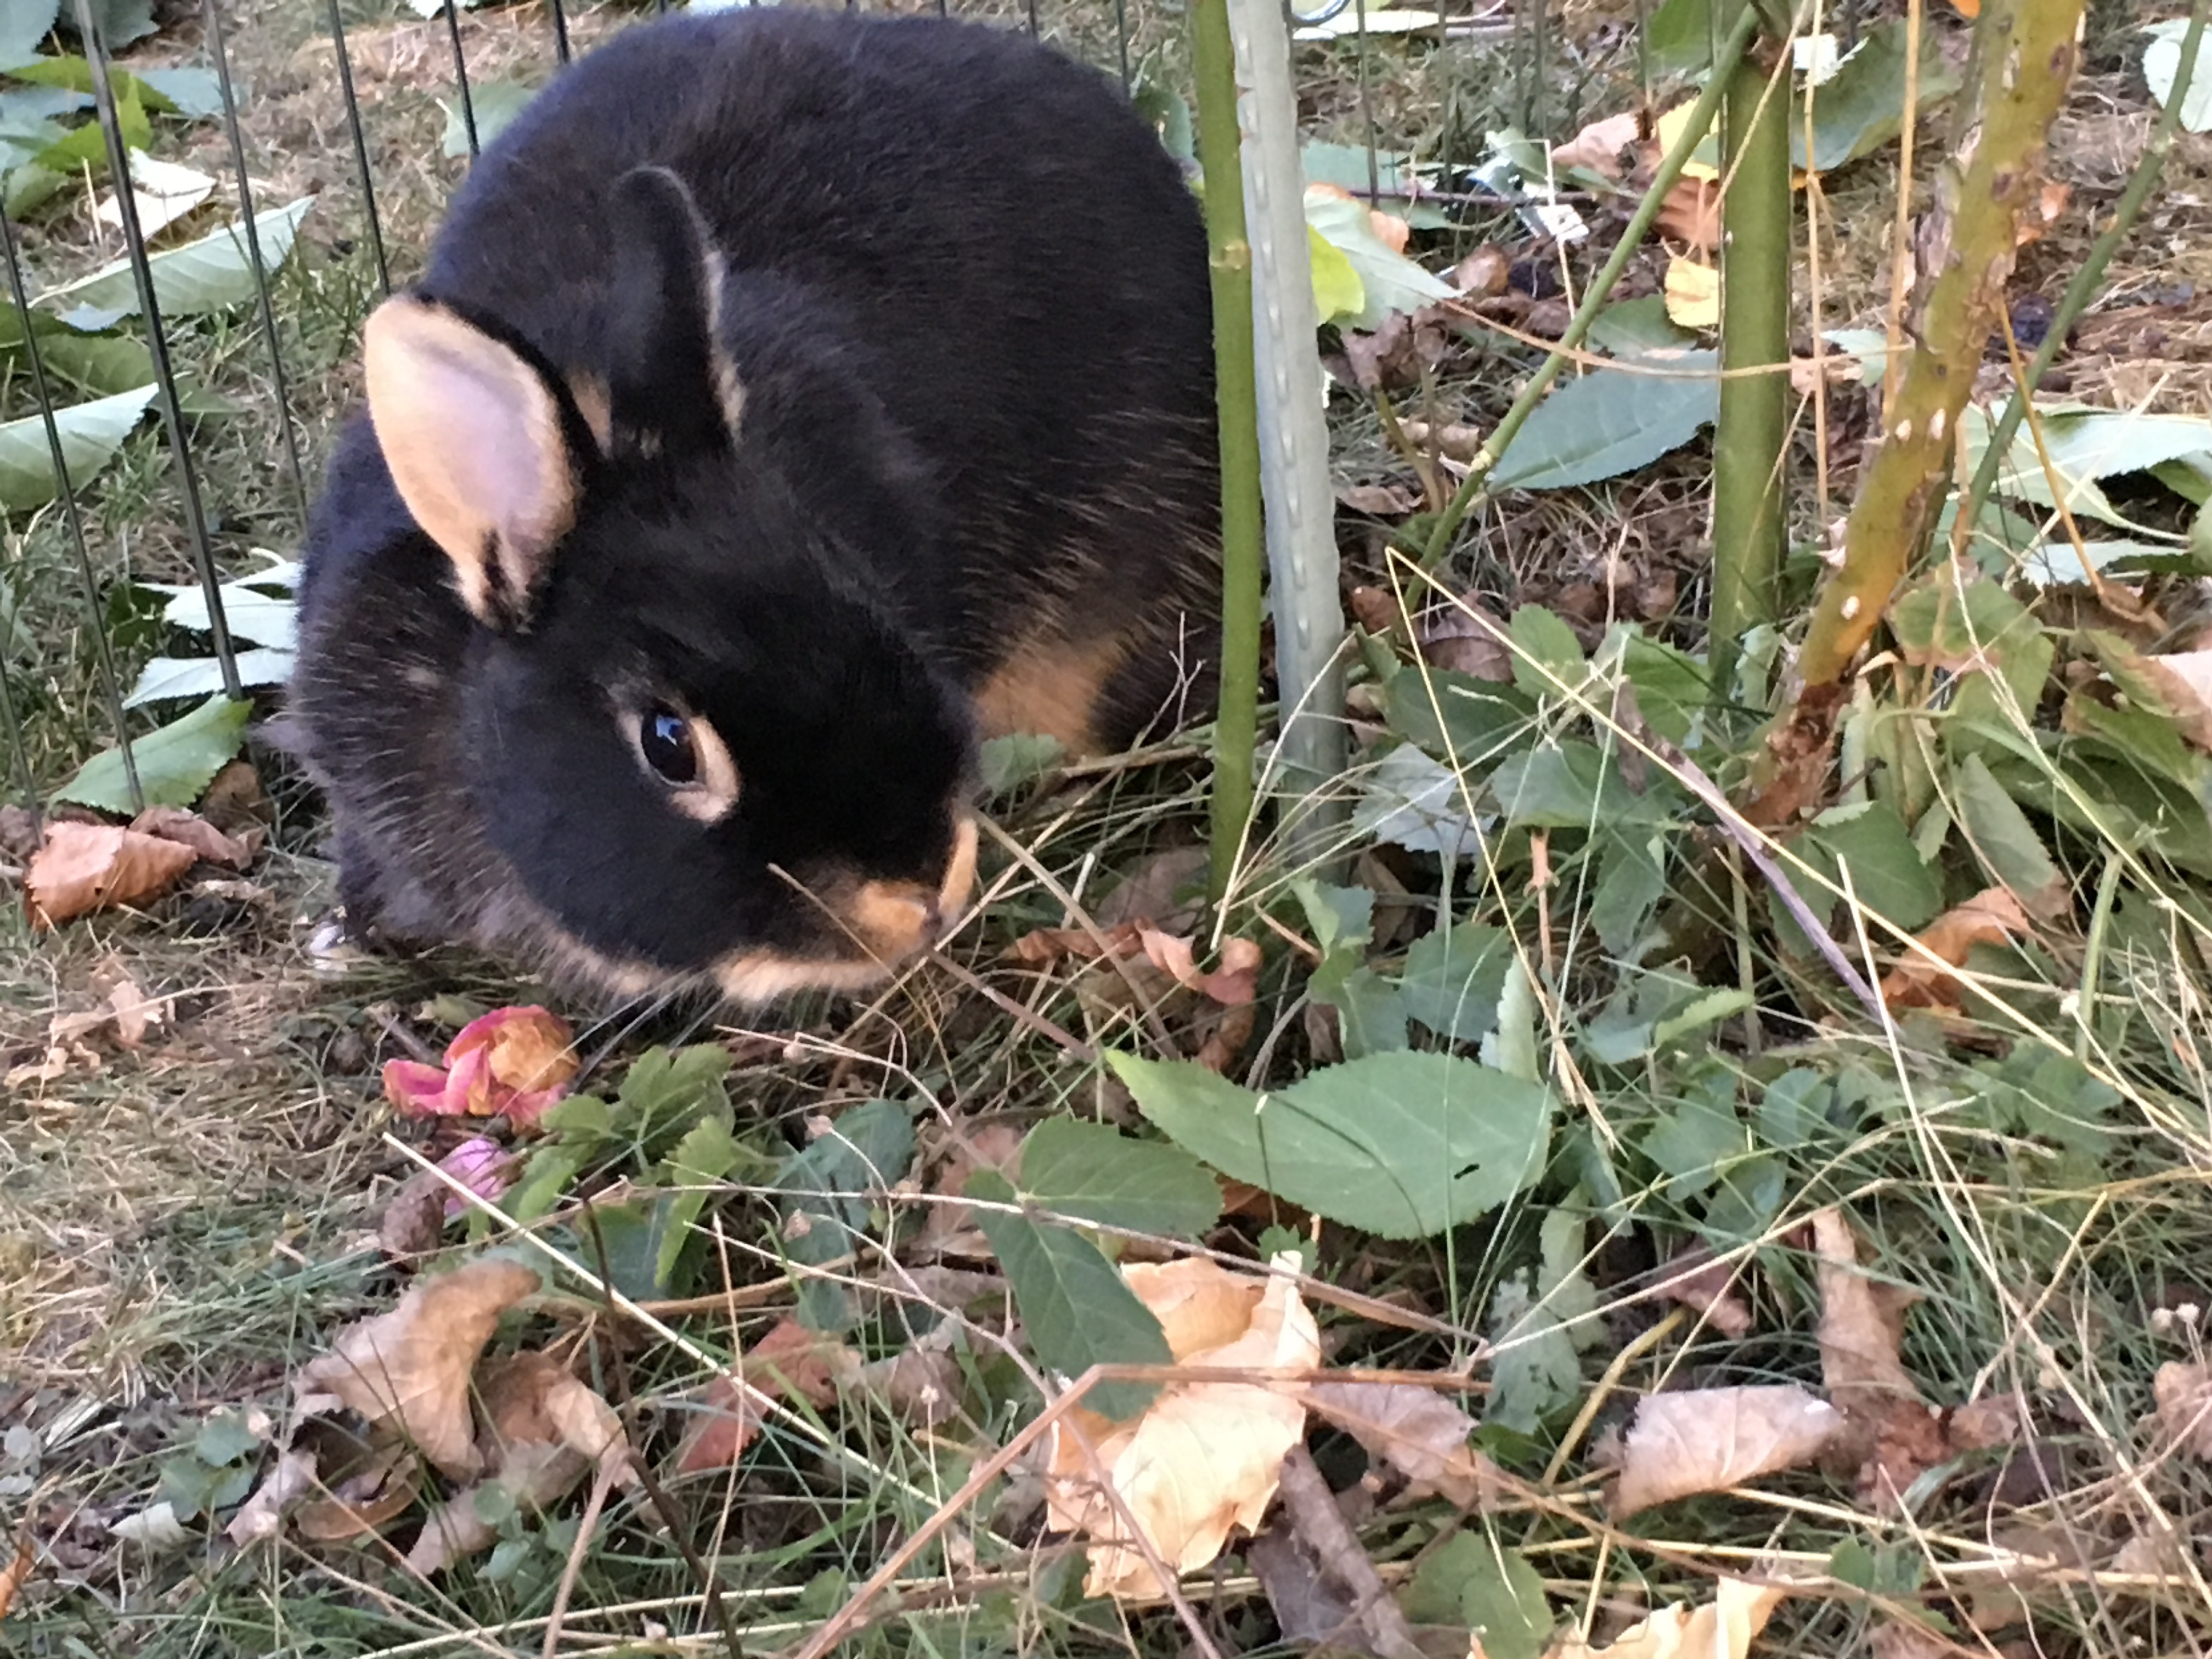 A black rabbit eating some leaves